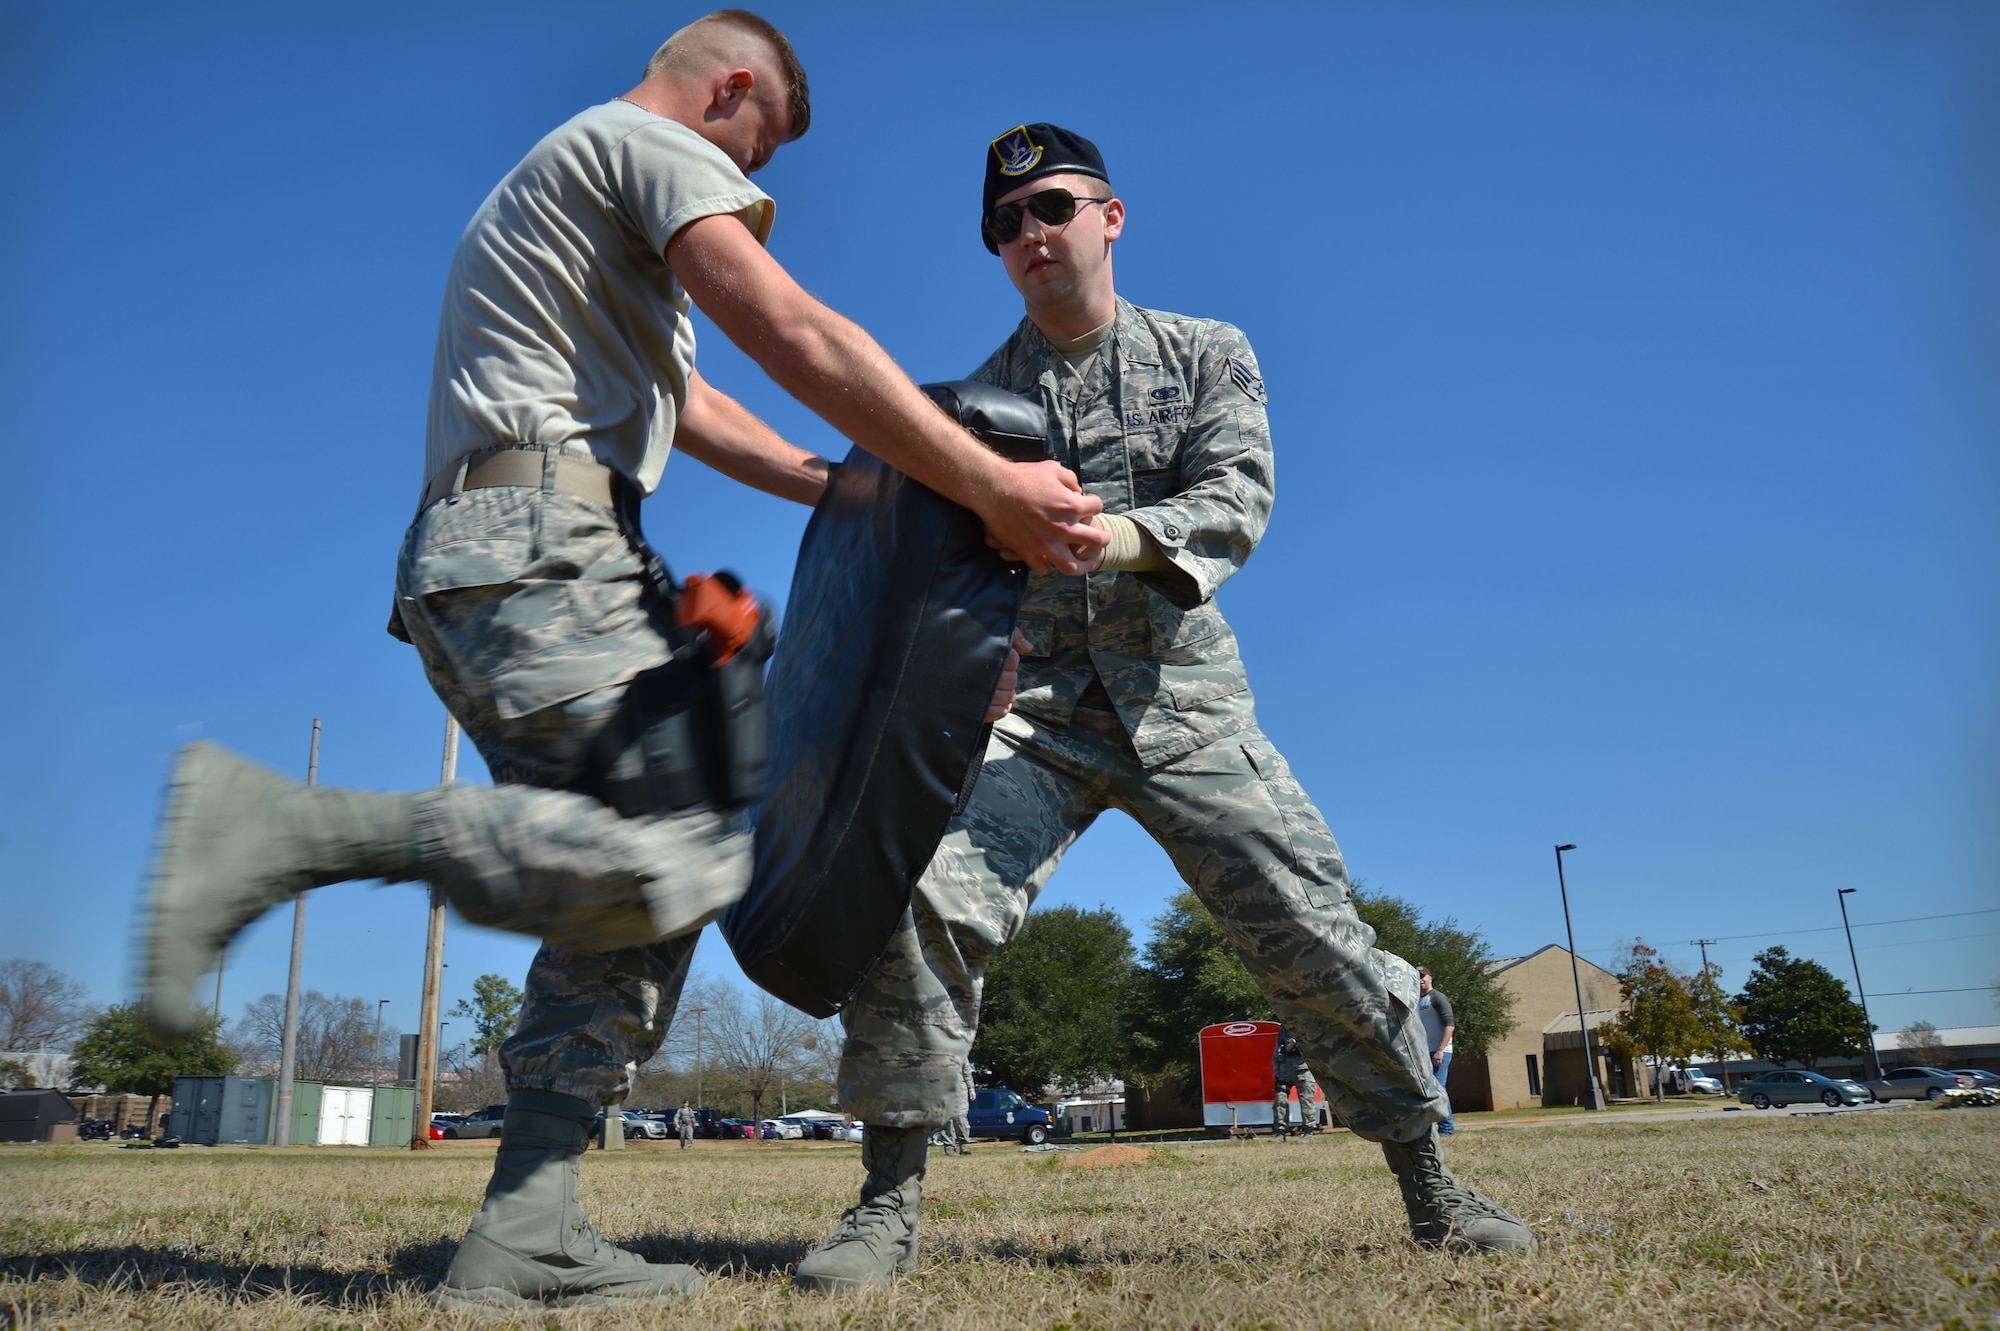 U.S. Air Force Airman 1st Class Joshua Beaugrand, 20th Security Forces Squadron entry controller, knees a strike pad after being pepper sprayed at Shaw Air Force Base, S.C., Feb. 29, 2016. The pepper spray training tests the Airmen to see how they would react in the event they get pepper sprayed while performing entry control duties. (U.S. Air Force photo by Senior Airman Michael Cossaboom)